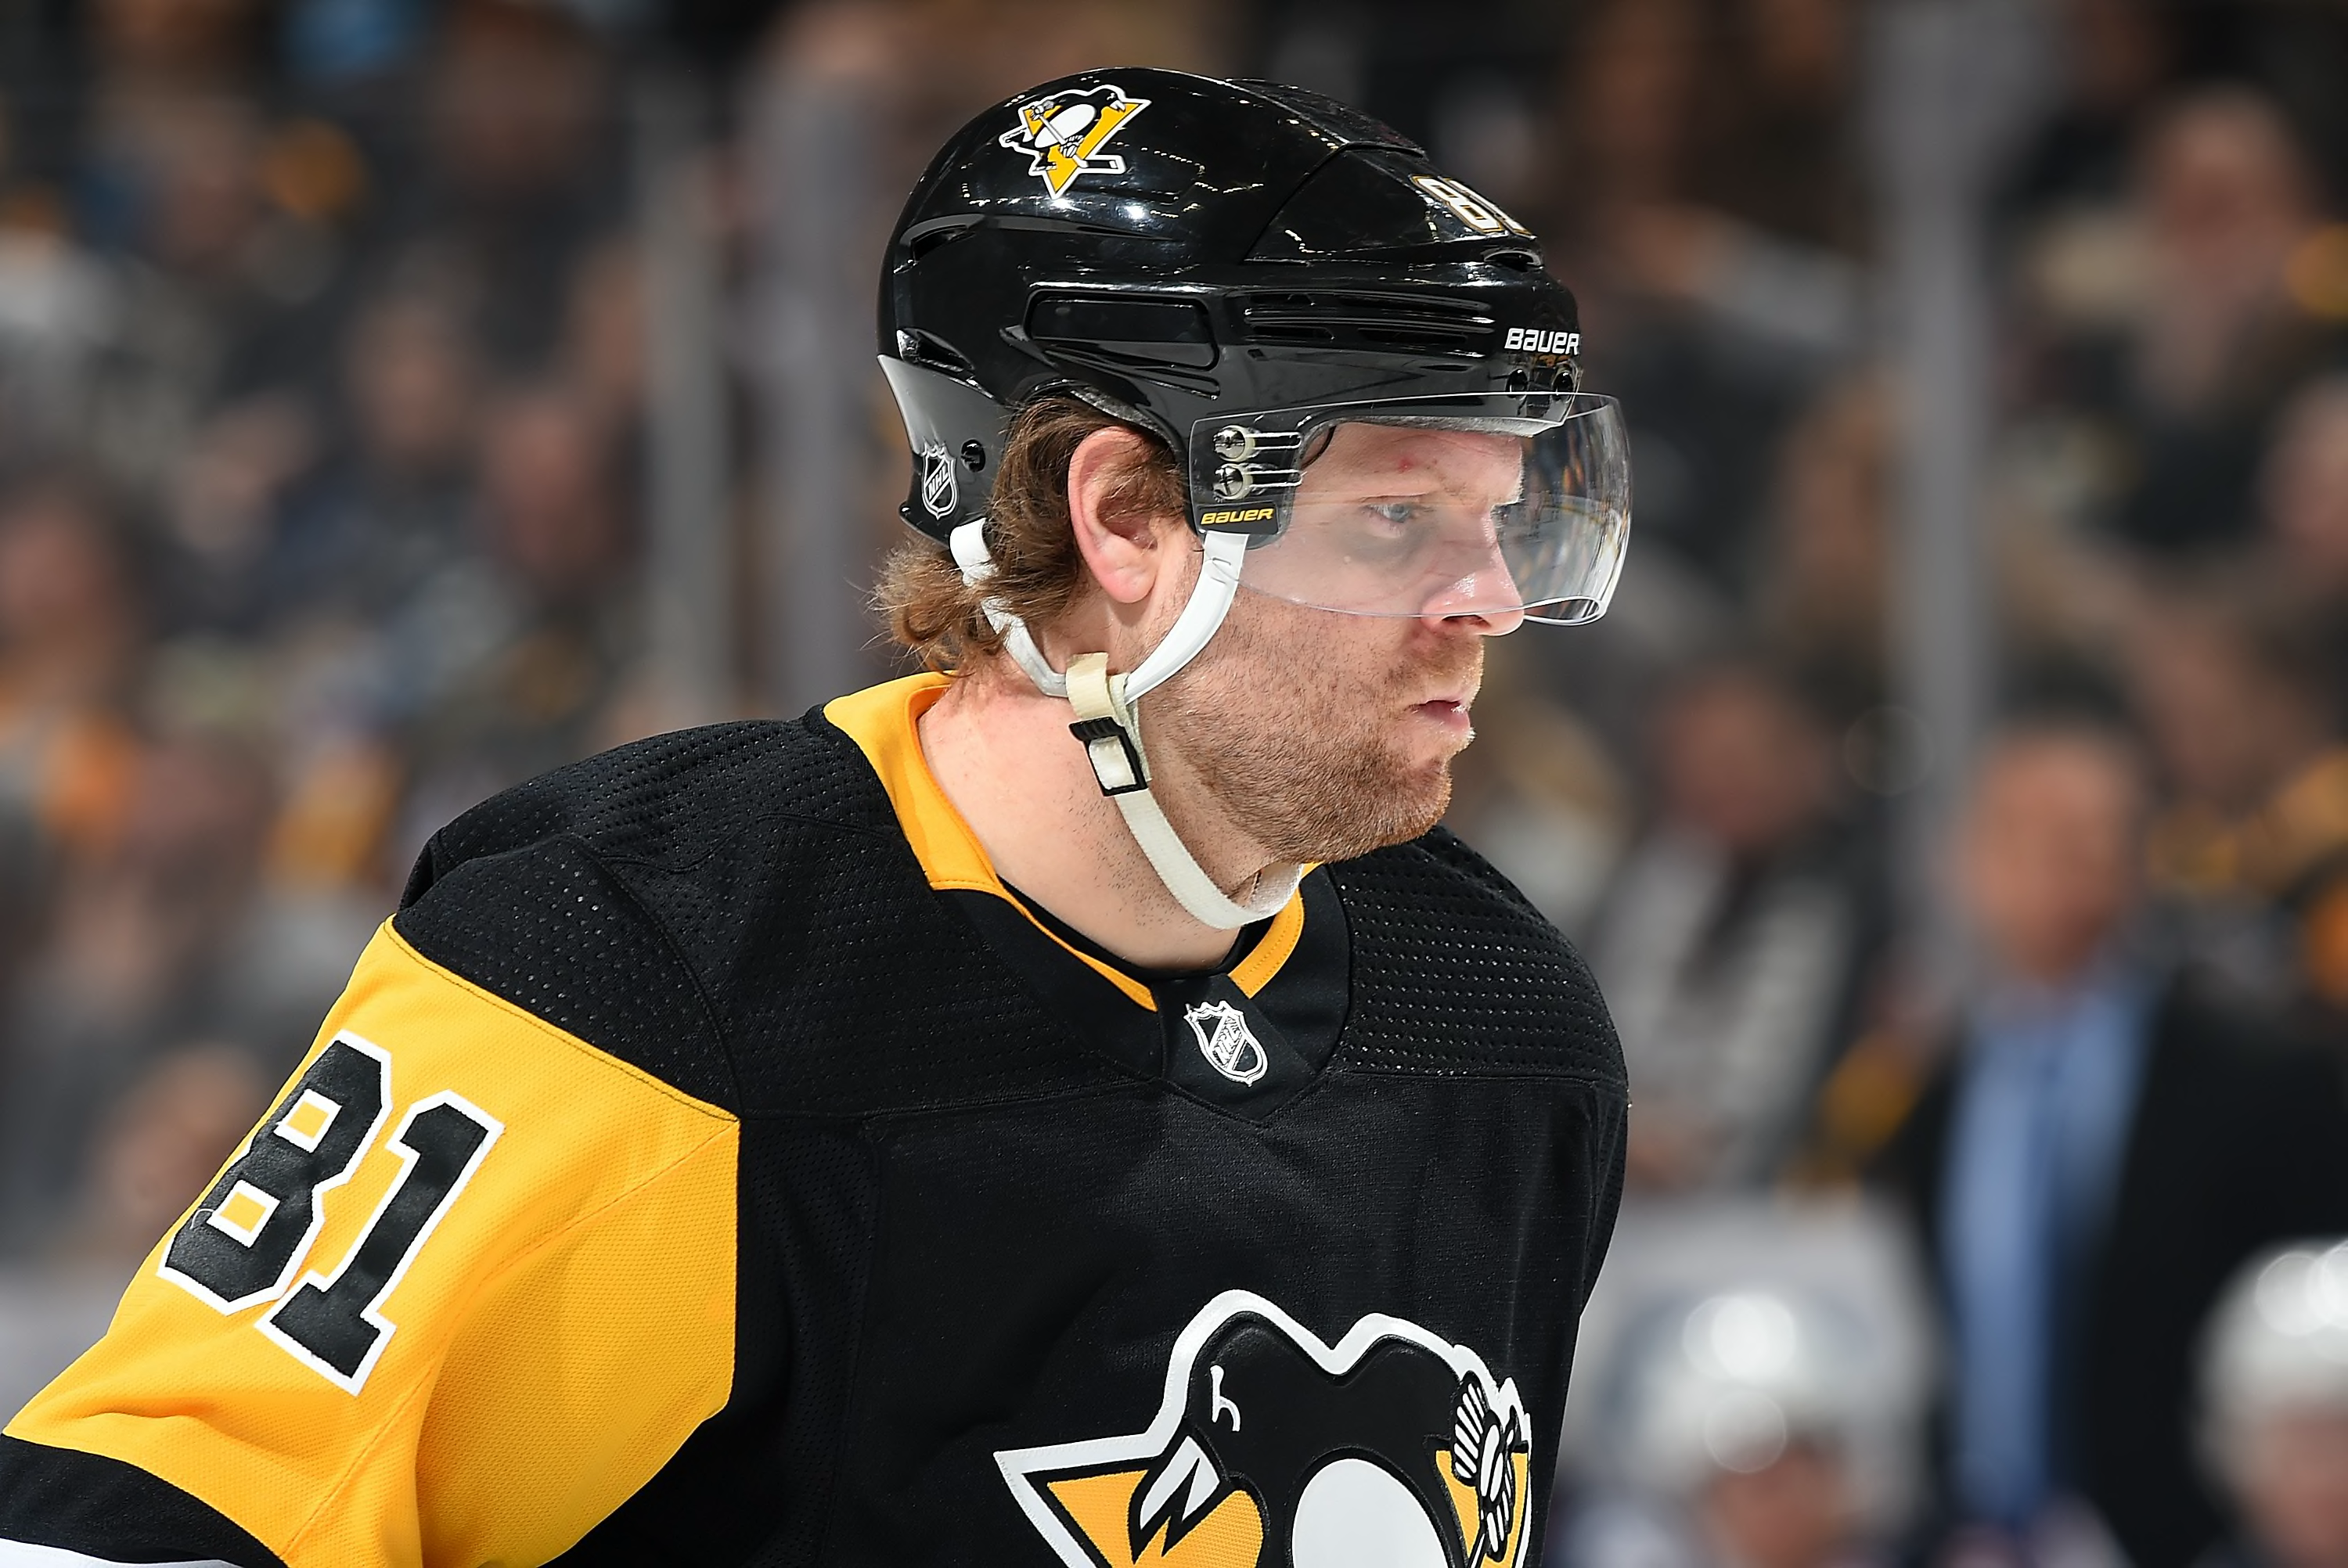 NHL Jersey Numbers on X: F Phil Kessel will wear jersey number 8